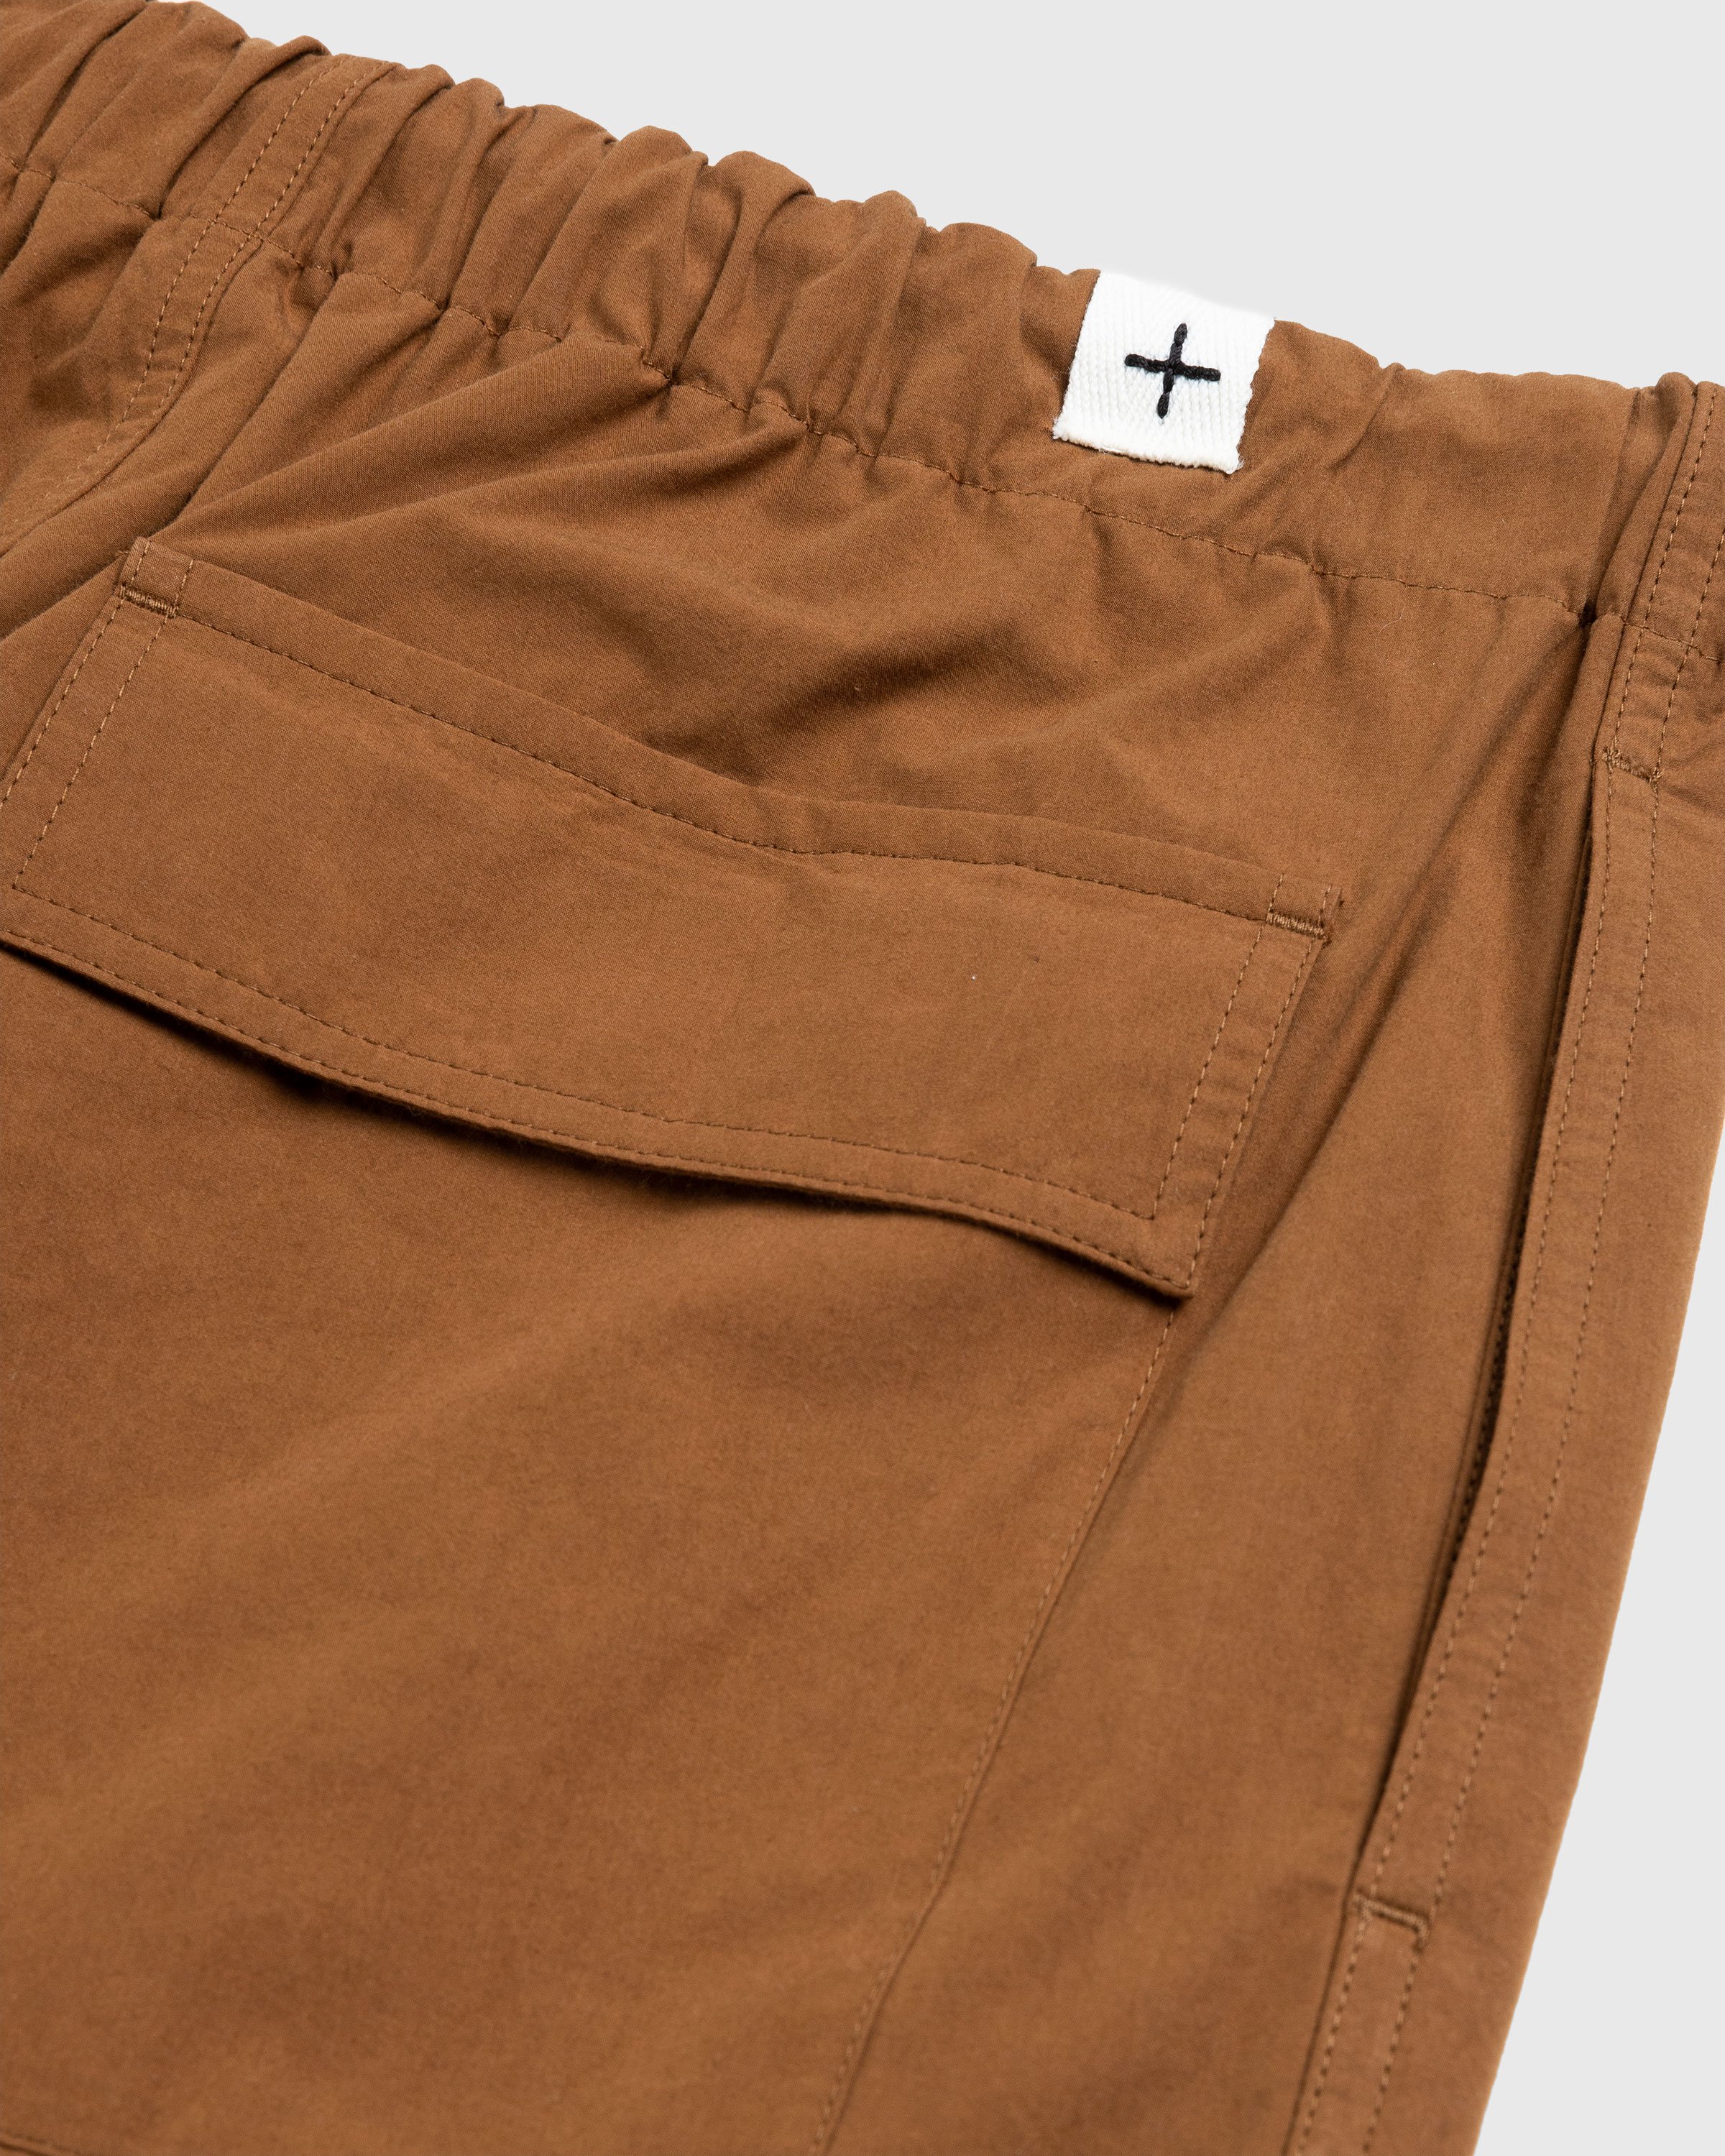 Jil Sander - Relaxed-Fit Cotton Trousers Tobacco - Clothing - Brown - Image 5